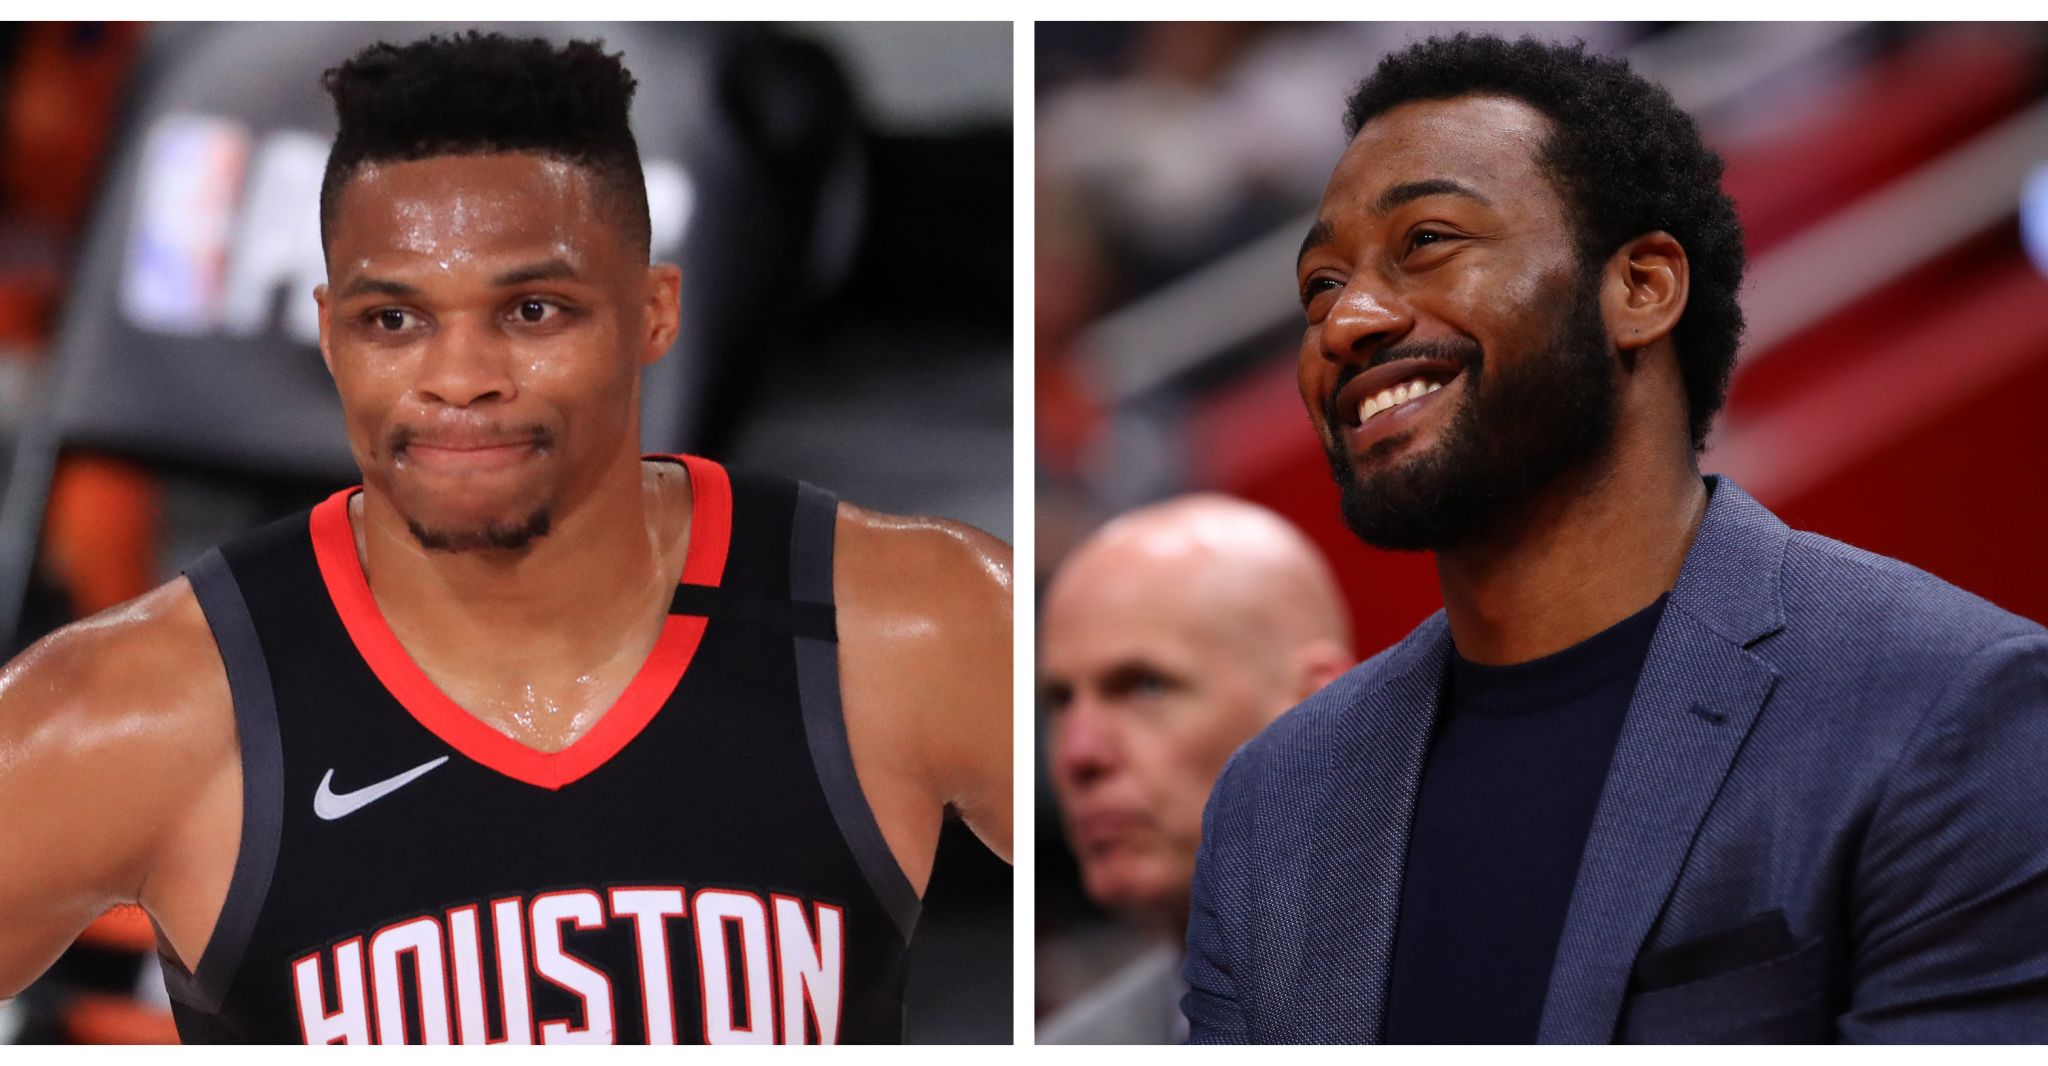 Rockets trade Russell Westbrook to Wizards for John Wall, pick - HoustonChronicle.com